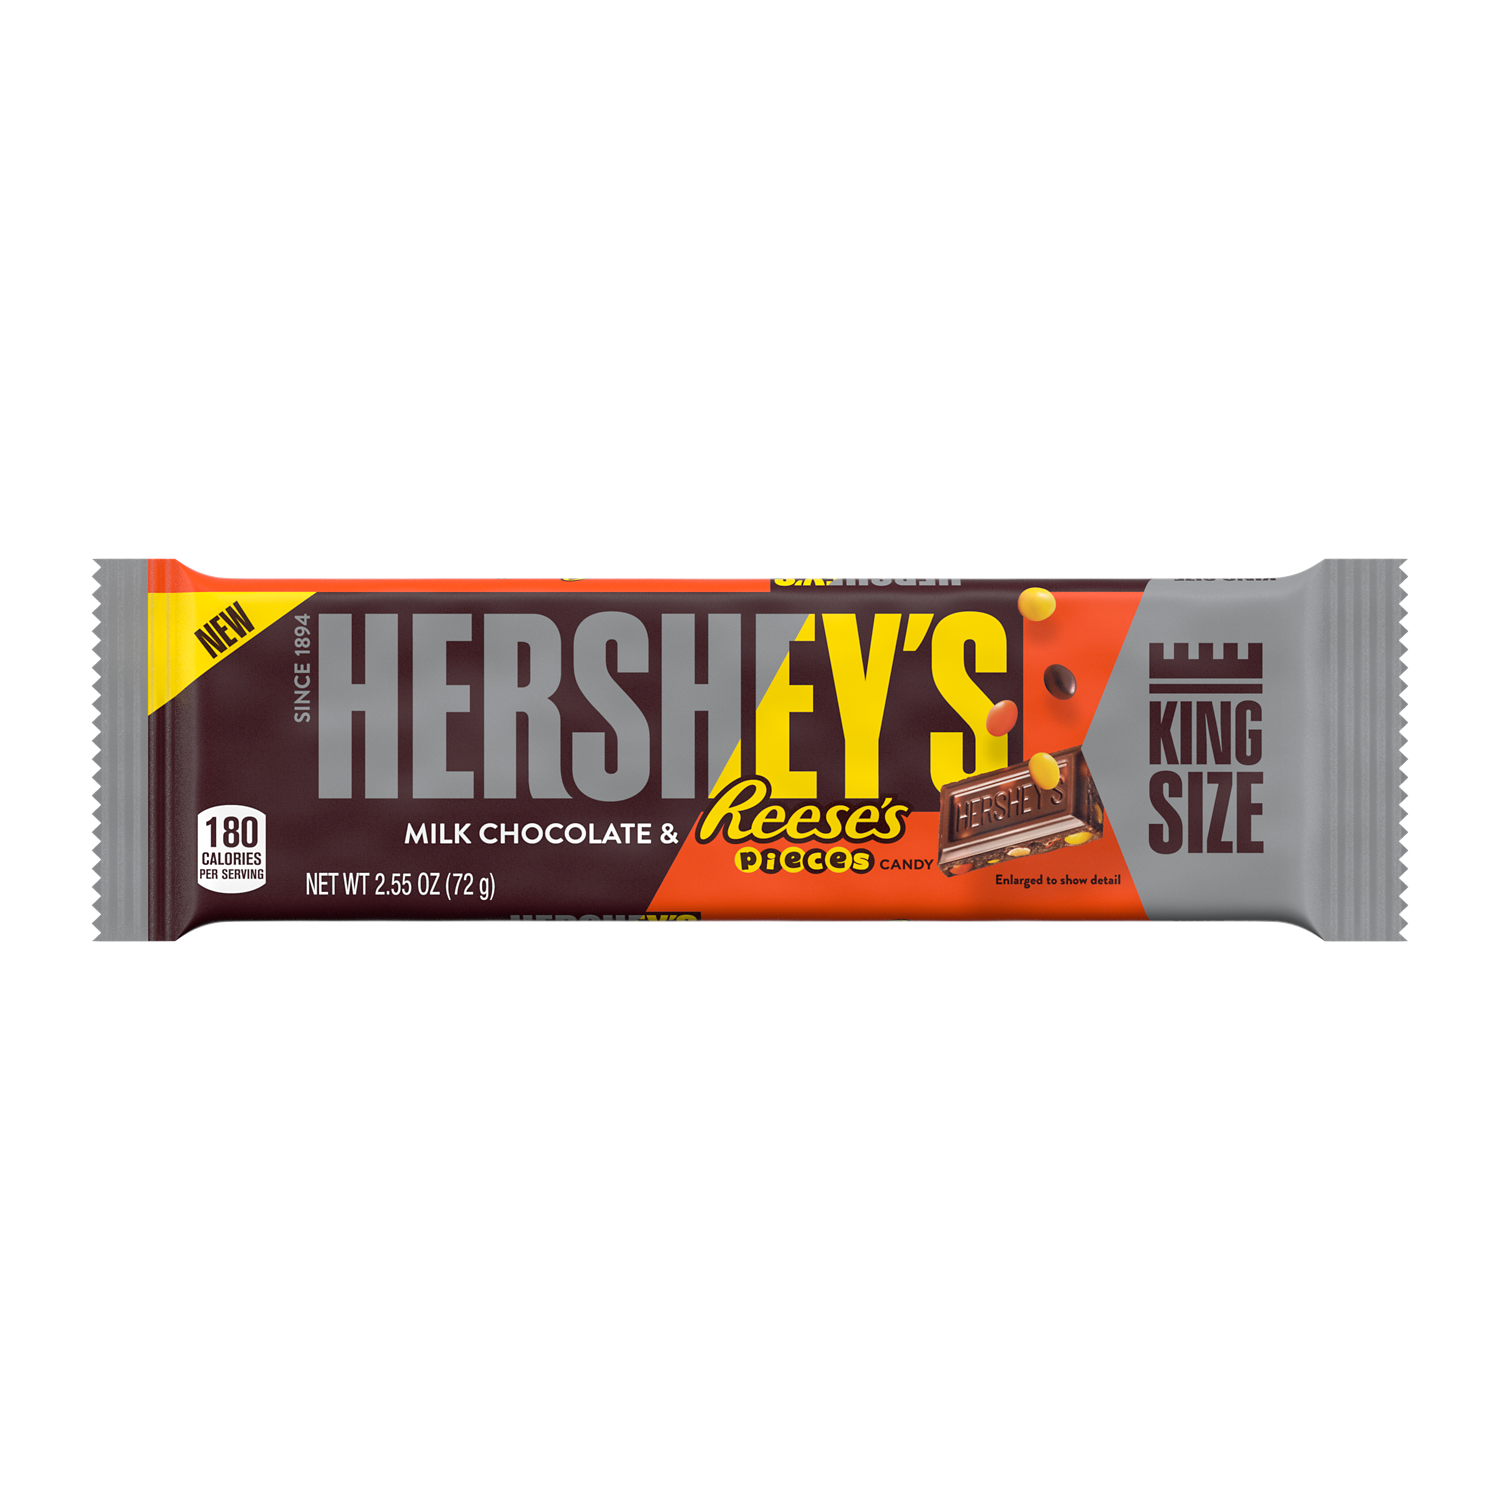 HERSHEY'S Milk Chocolate & REESE'S PIECES King Size Candy Bar, 2.55 oz - Front of Package